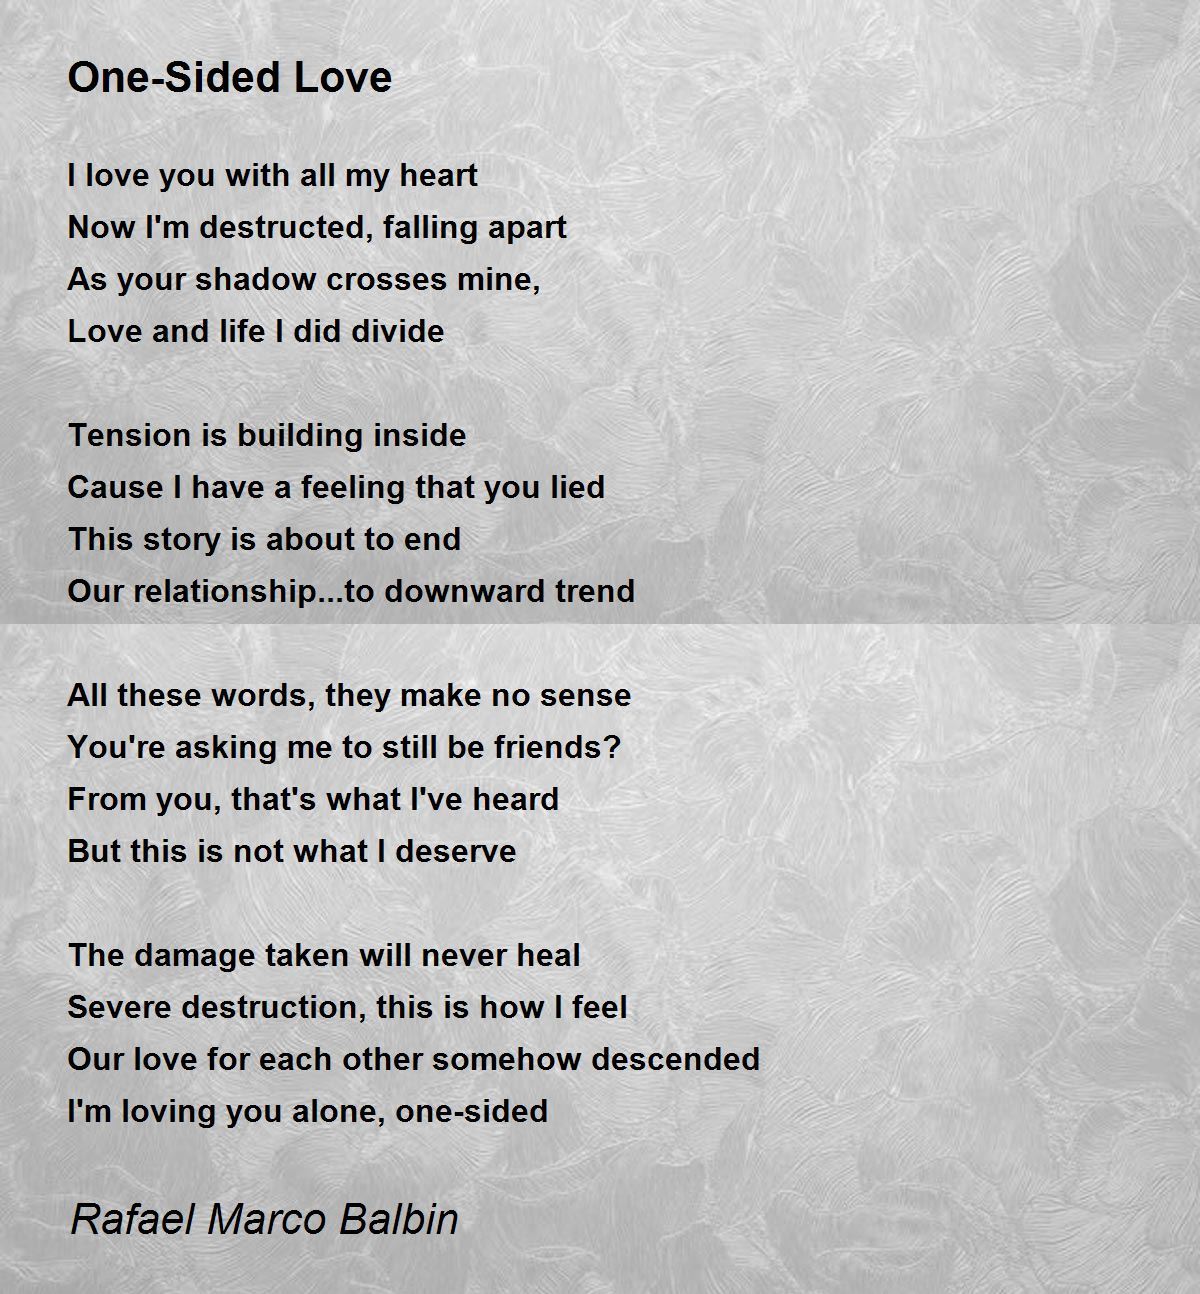 One-Sided Love - One-Sided Love Poem by Rafael Marco Balbin